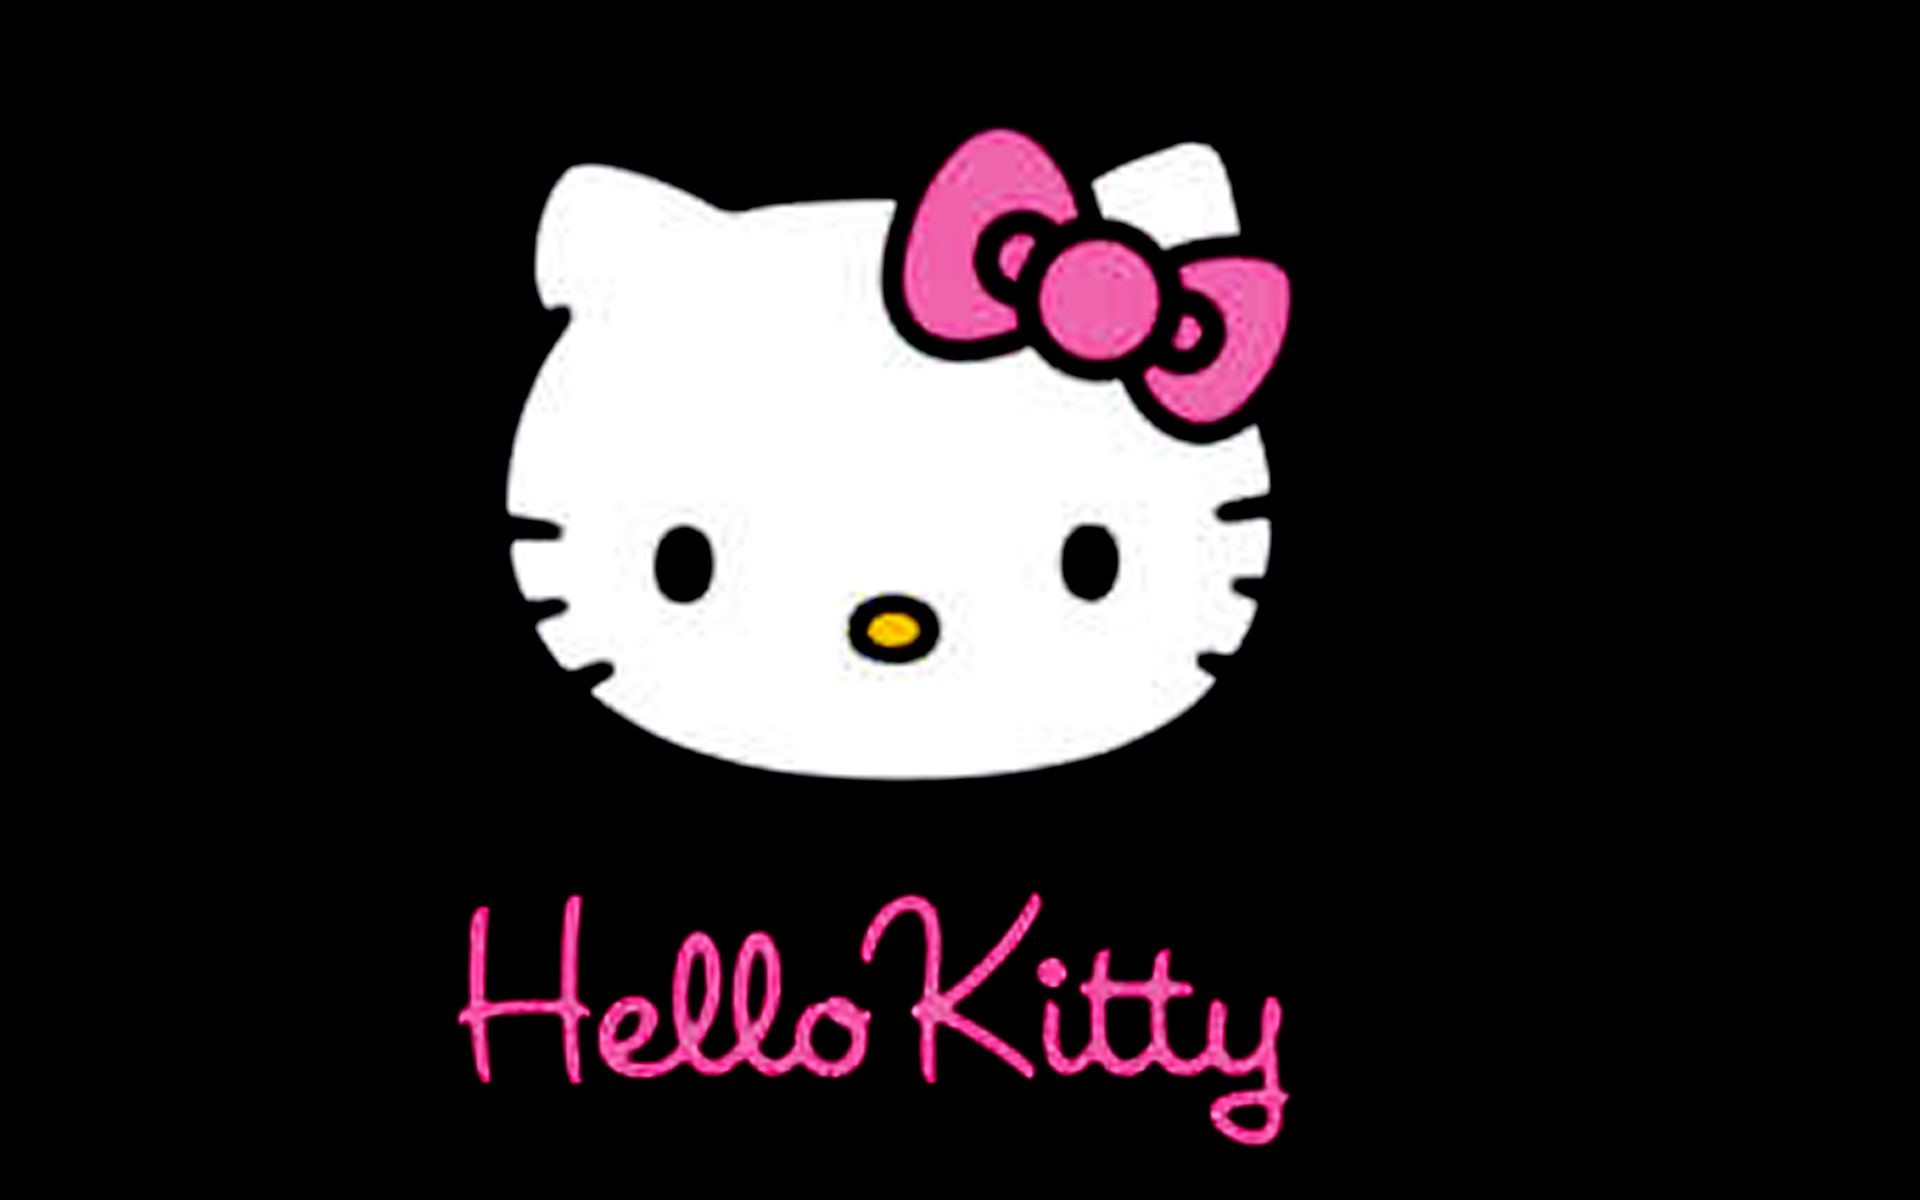 1920x1200 Hello Kitty Pink And Black Love Wallpaper For Android #xekd4 .